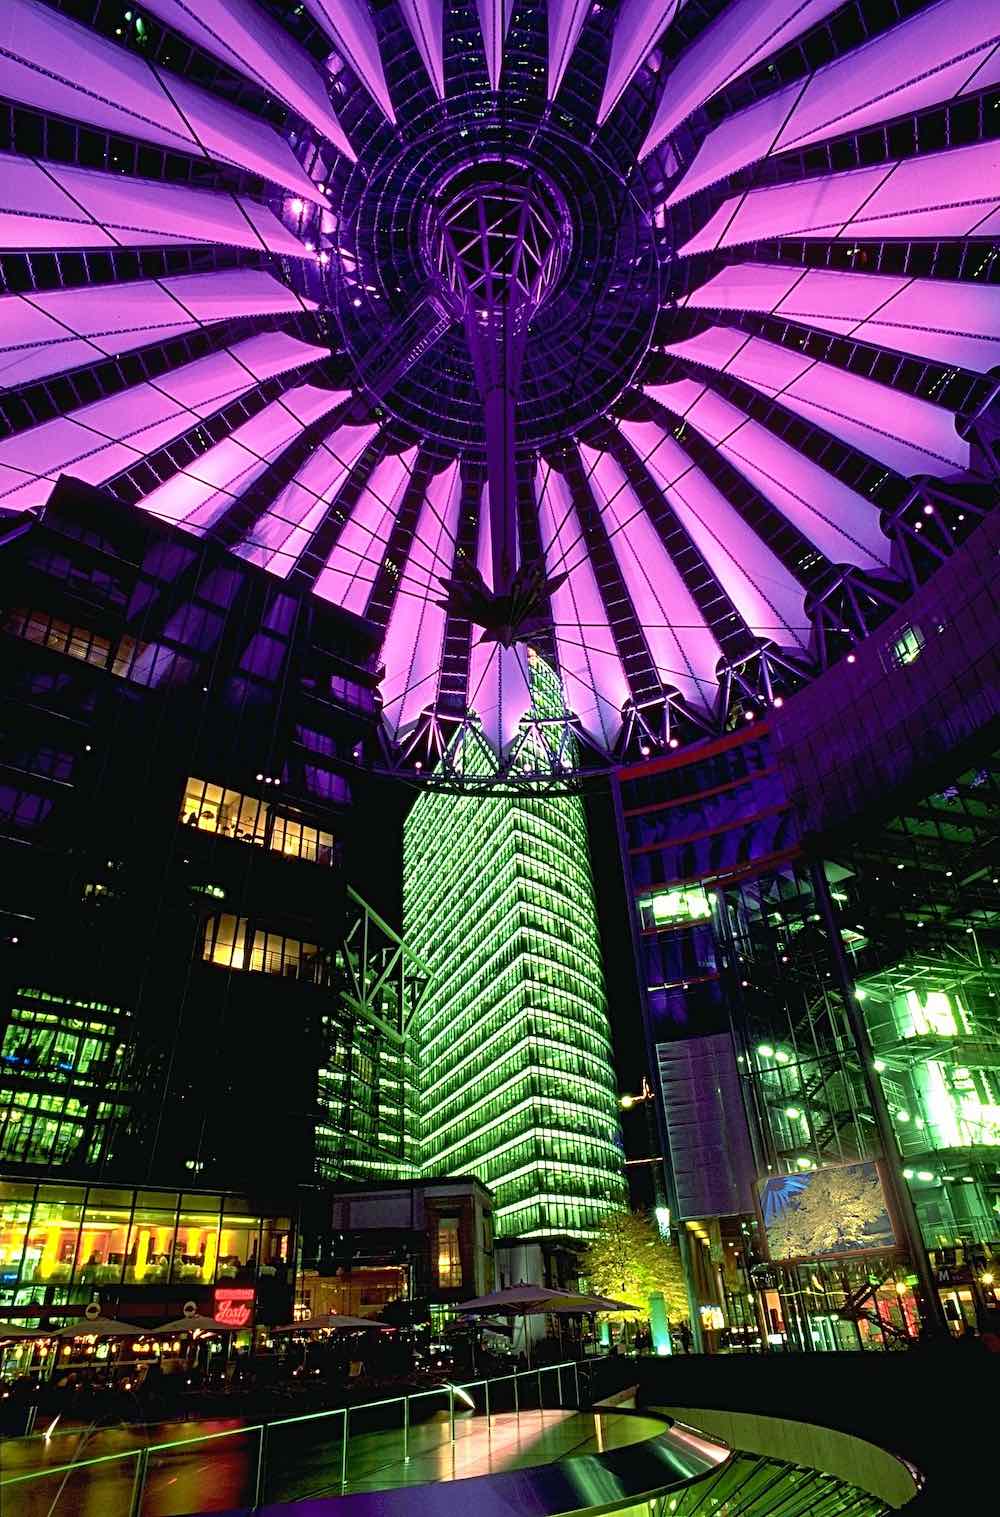 Sony Center by Helmut Jahn in Berlin, 2000 - Photo by Andreas Tille